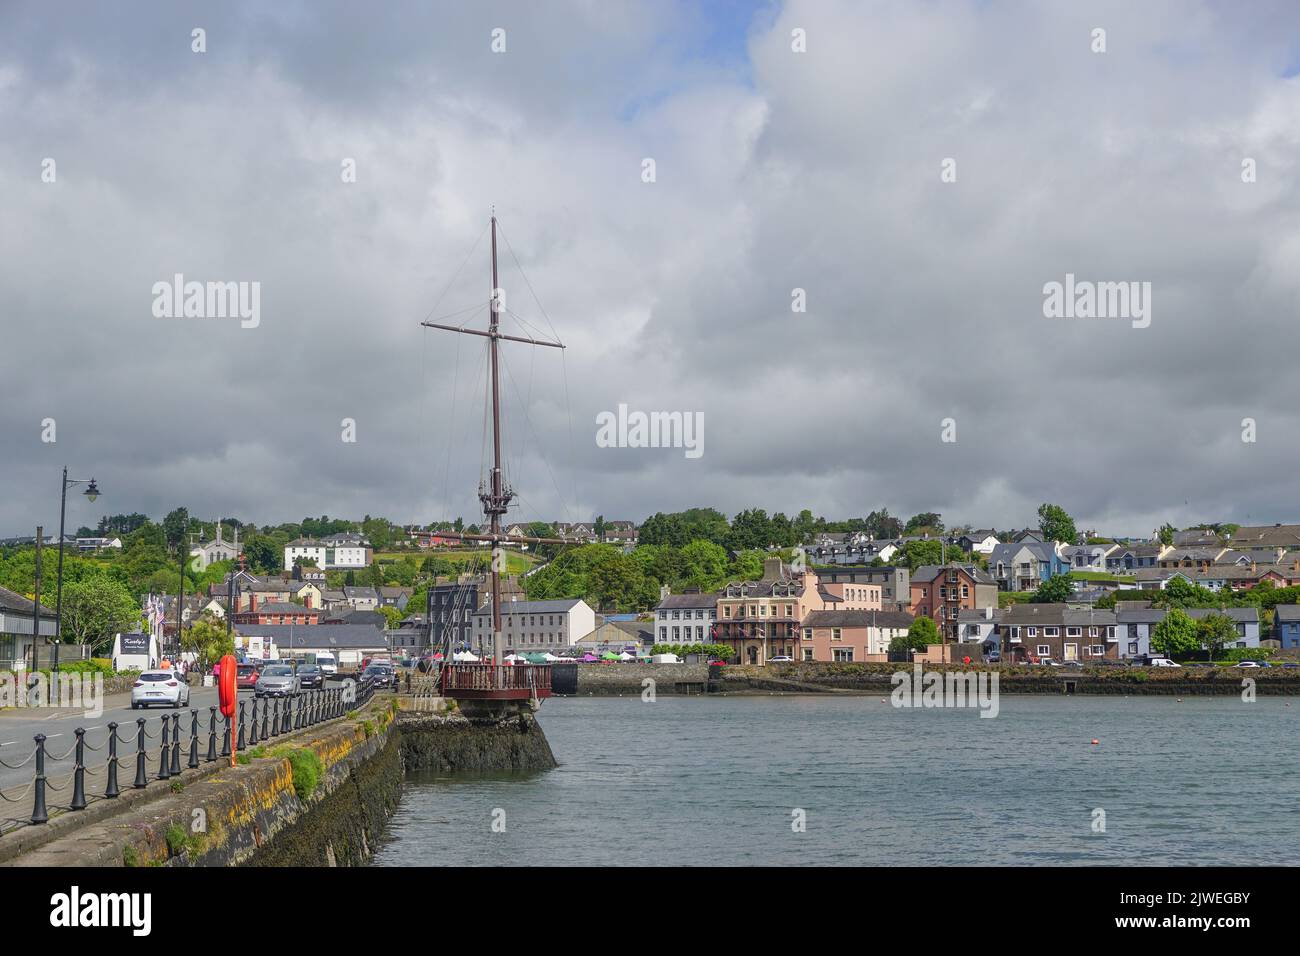 Kinsale, Co. Cork, Ireland: Replica mast from a Spanish galleon on the quayside overlooking Kinsale Harbour. Erected in 2001. Stock Photo